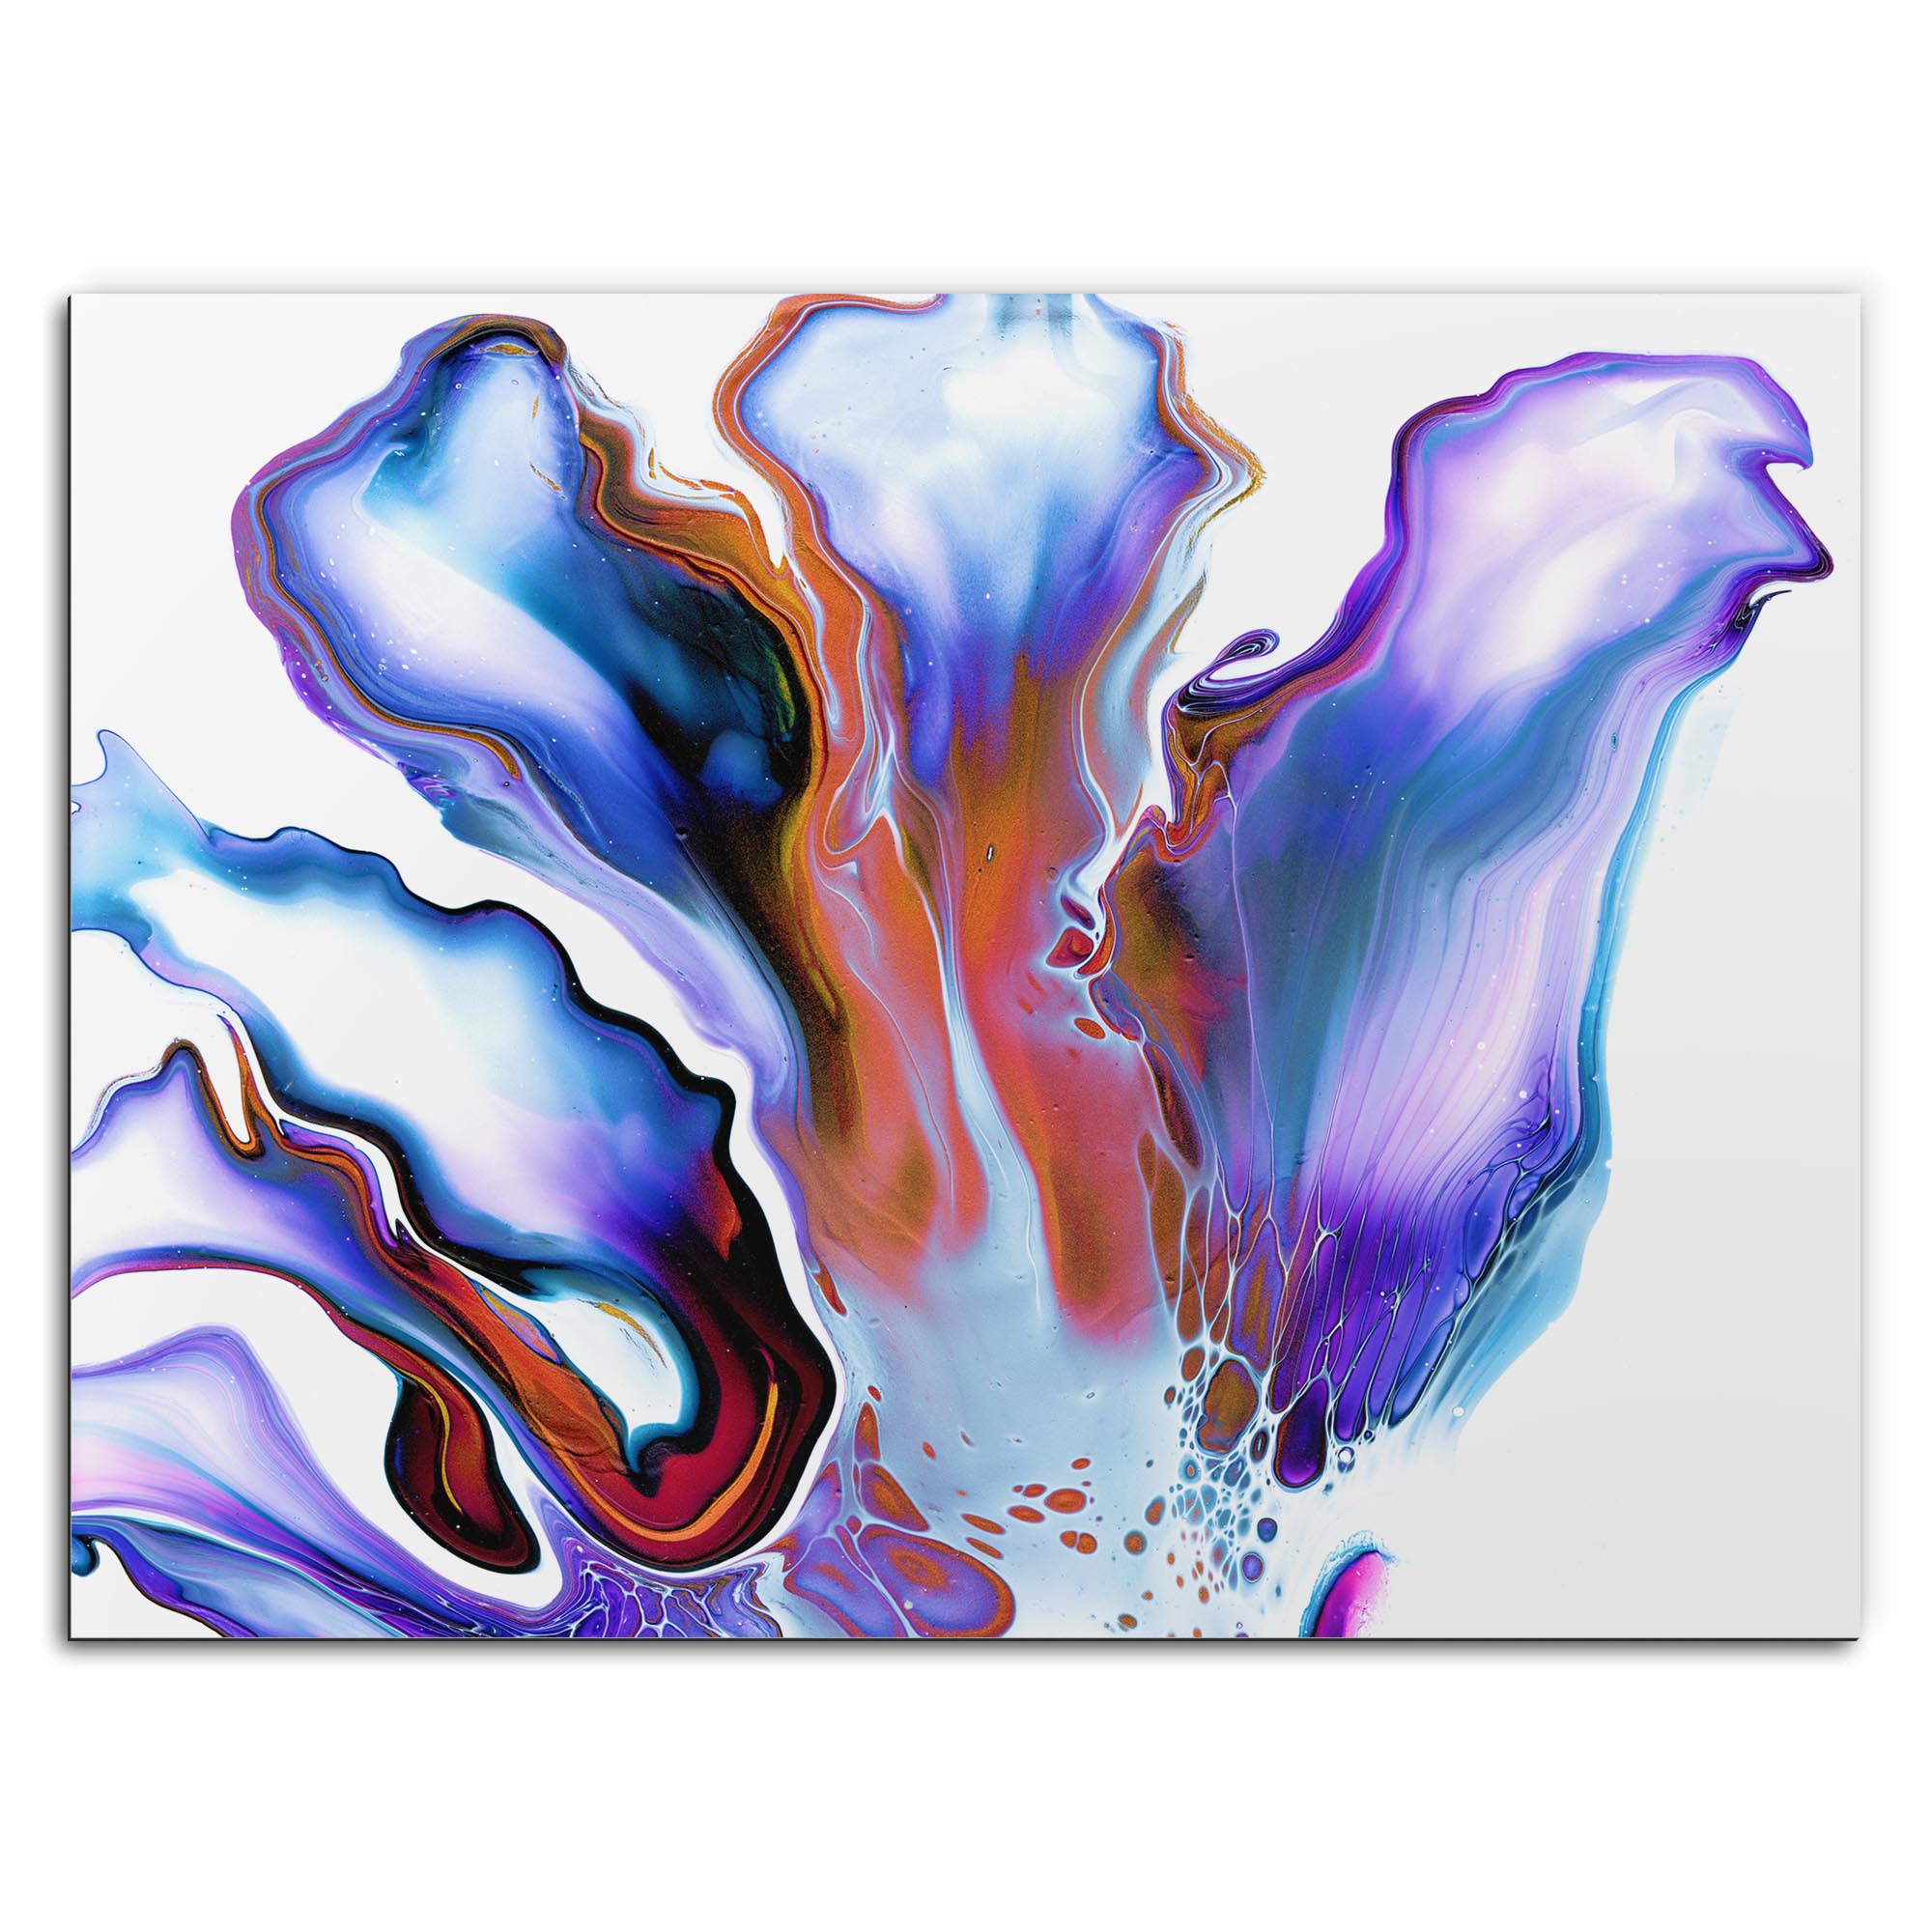 Elana Reiter 'Blossom' 32in x 24in Contemporary Style Abstract Wall Art